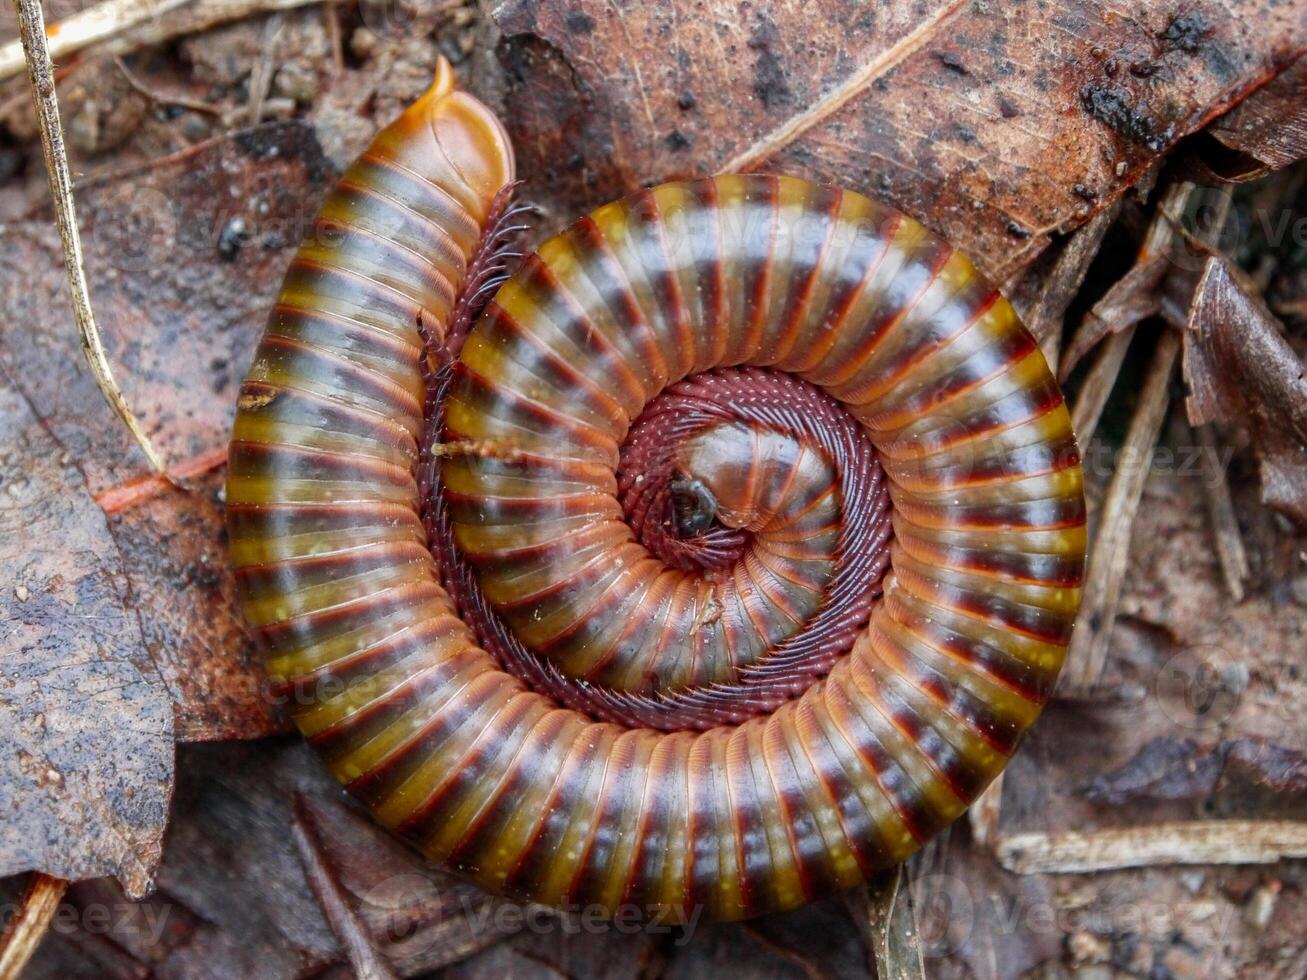 A coiled millipede shaped on ground. photo